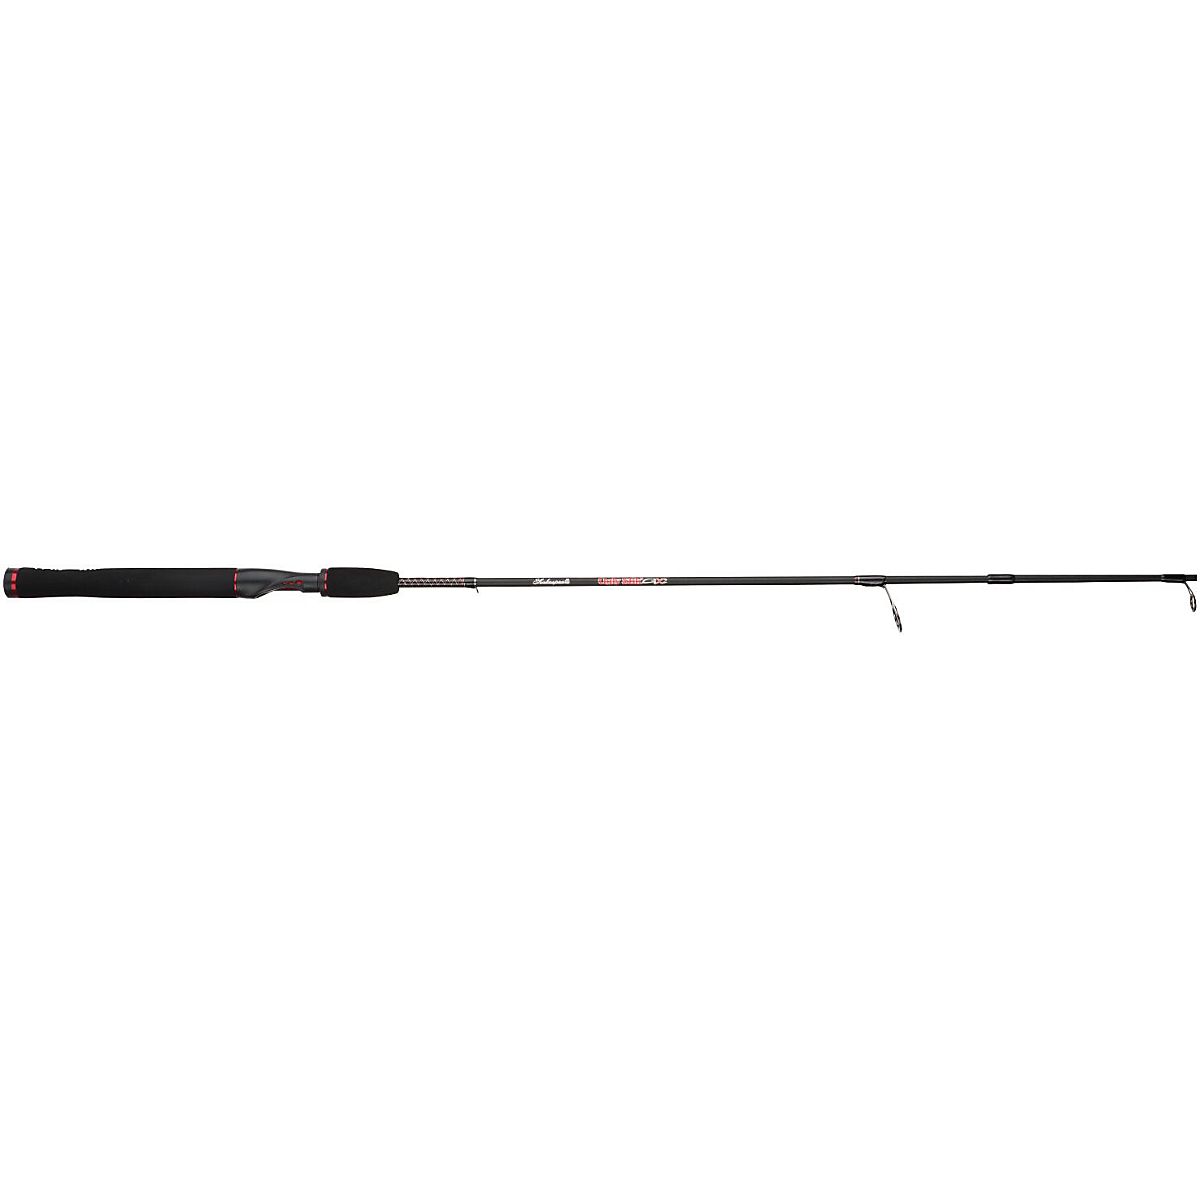 Academy Sports + Outdoors Ugly Stik GX2 6'6 MH Casting Rod